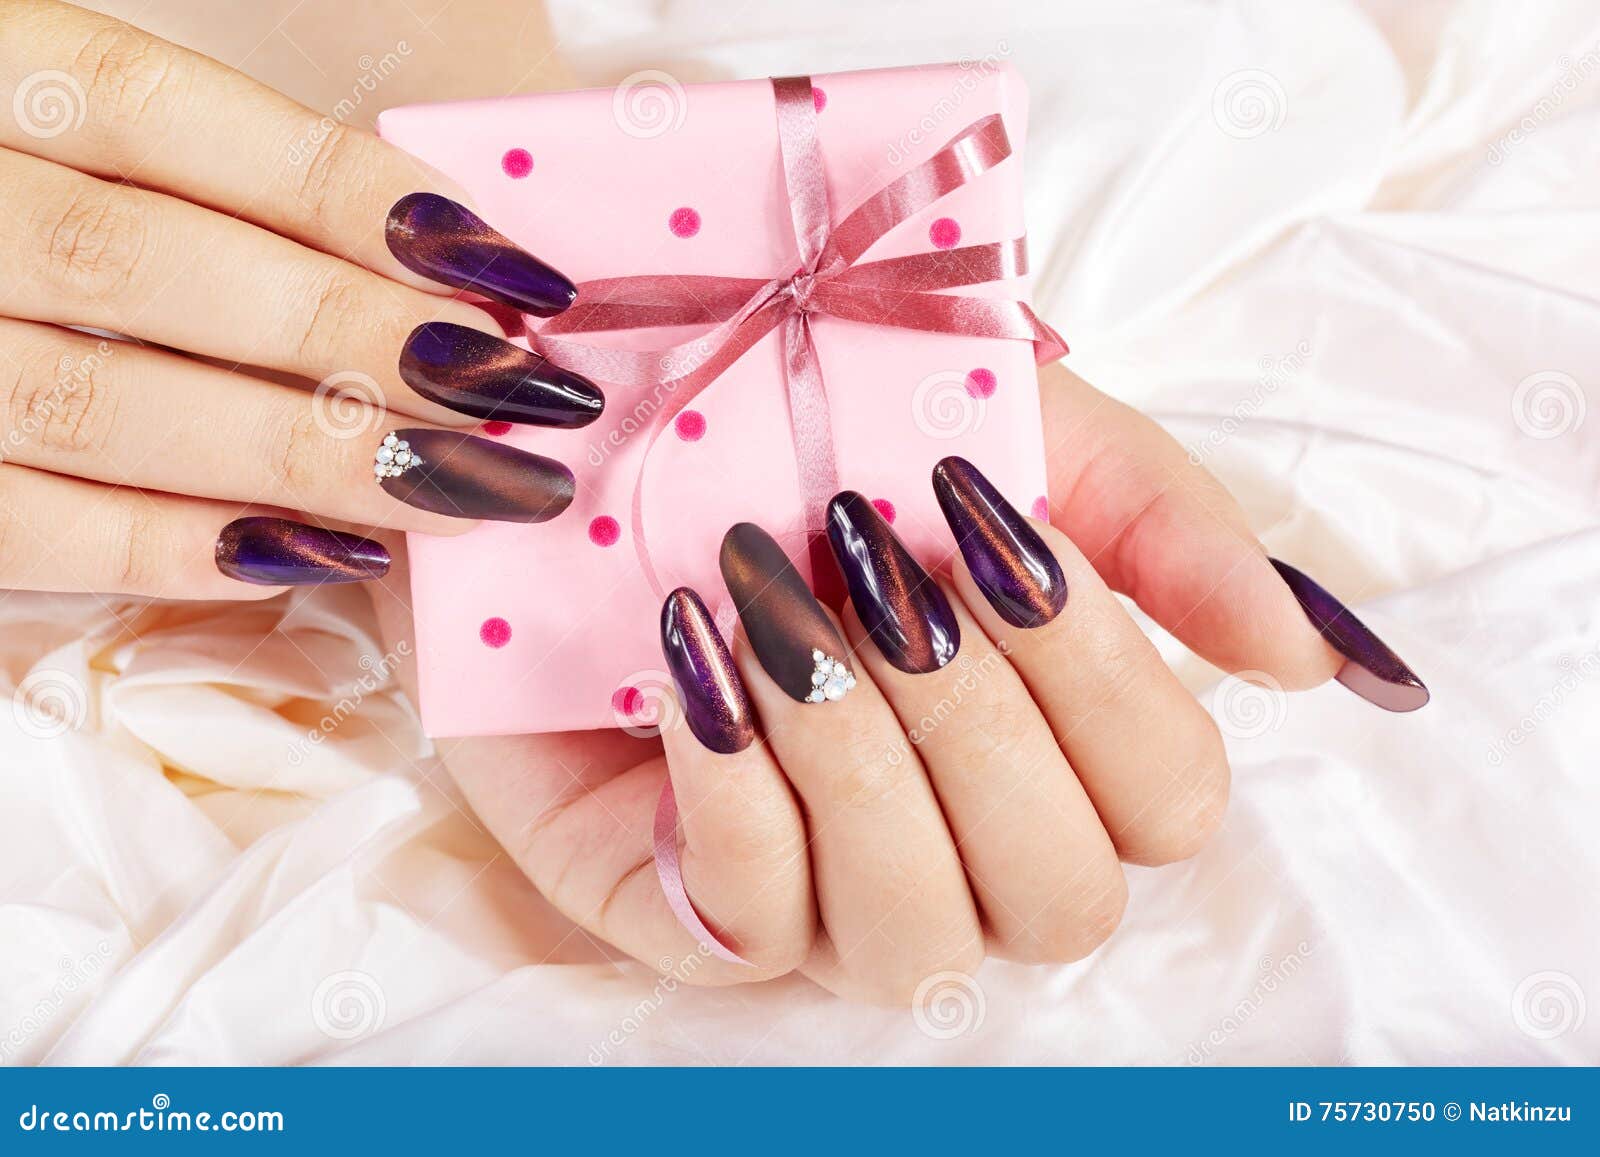 hands with long artificial manicured nails holding a gift box